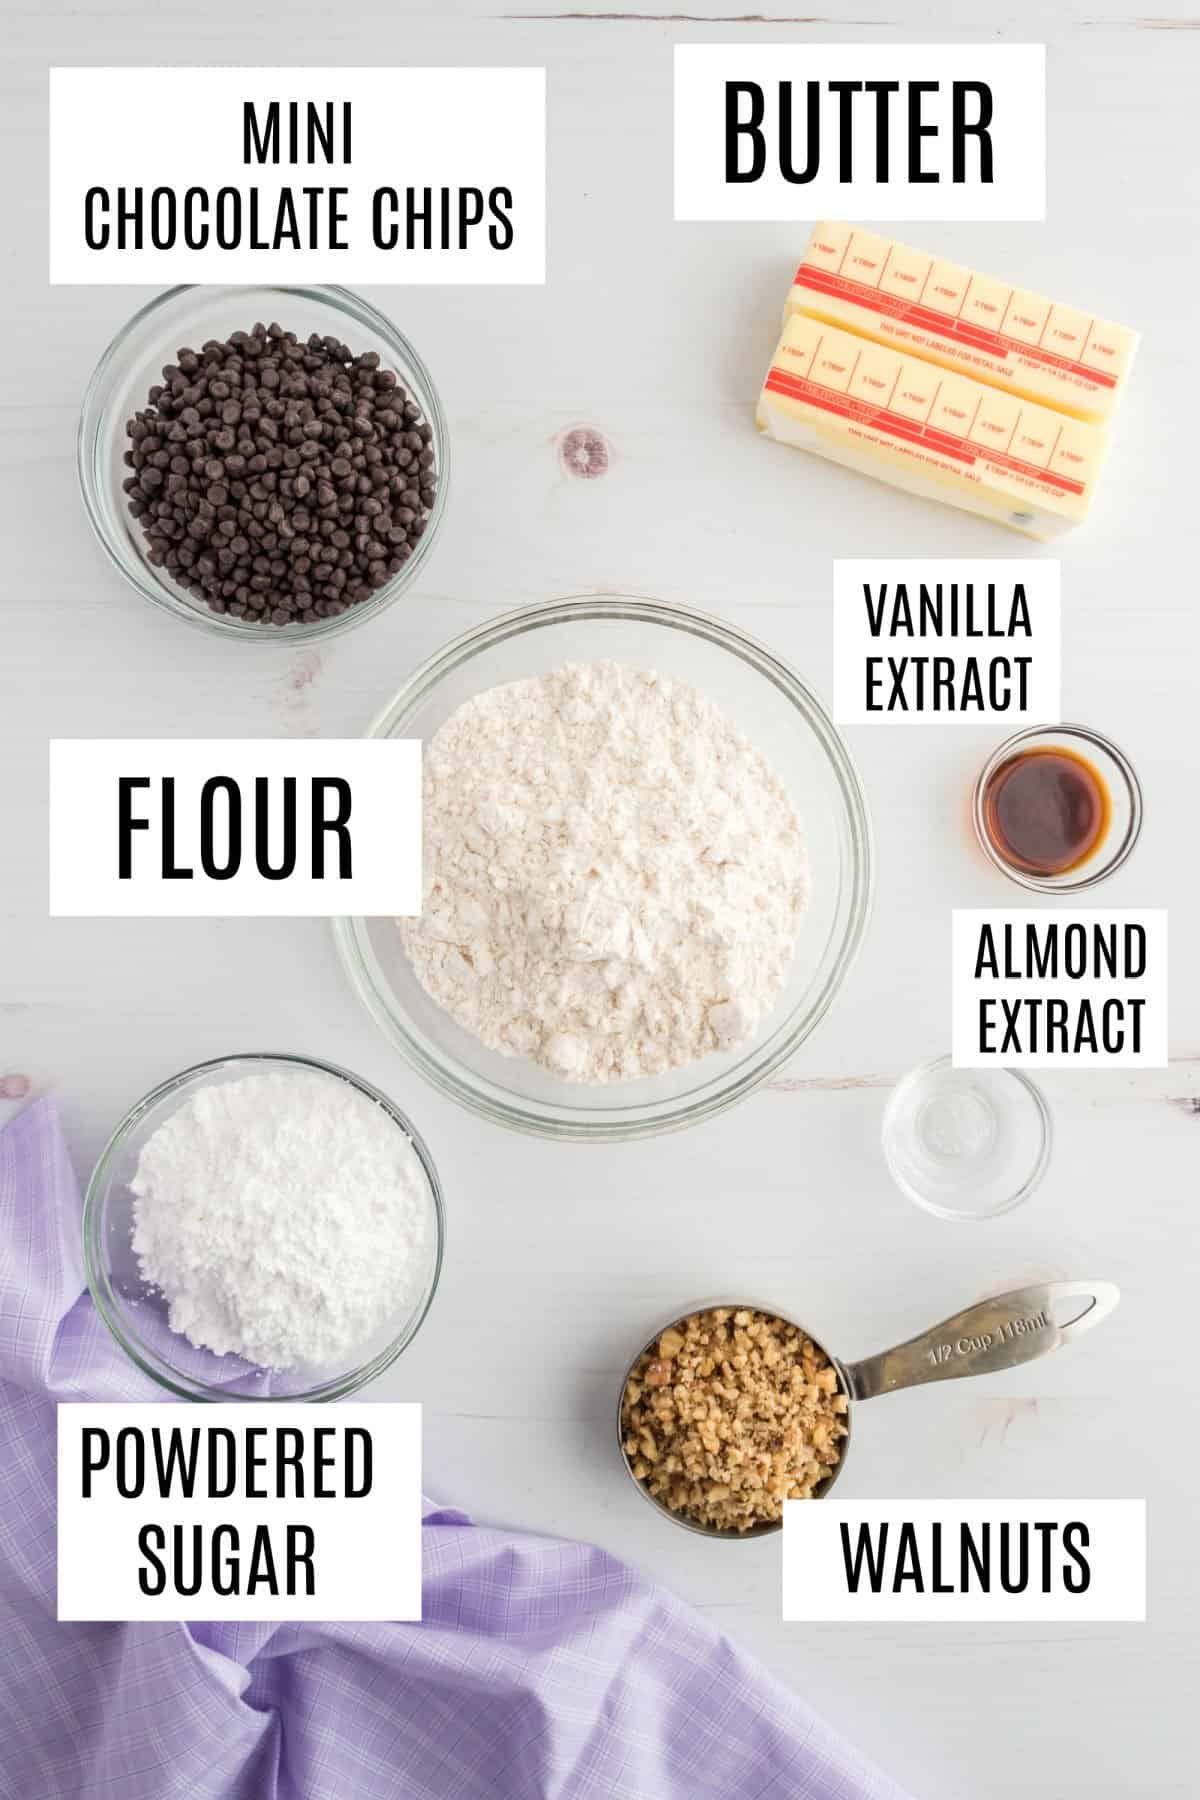 Ingredients to make chocolate chip shortbread cookies with nuts.